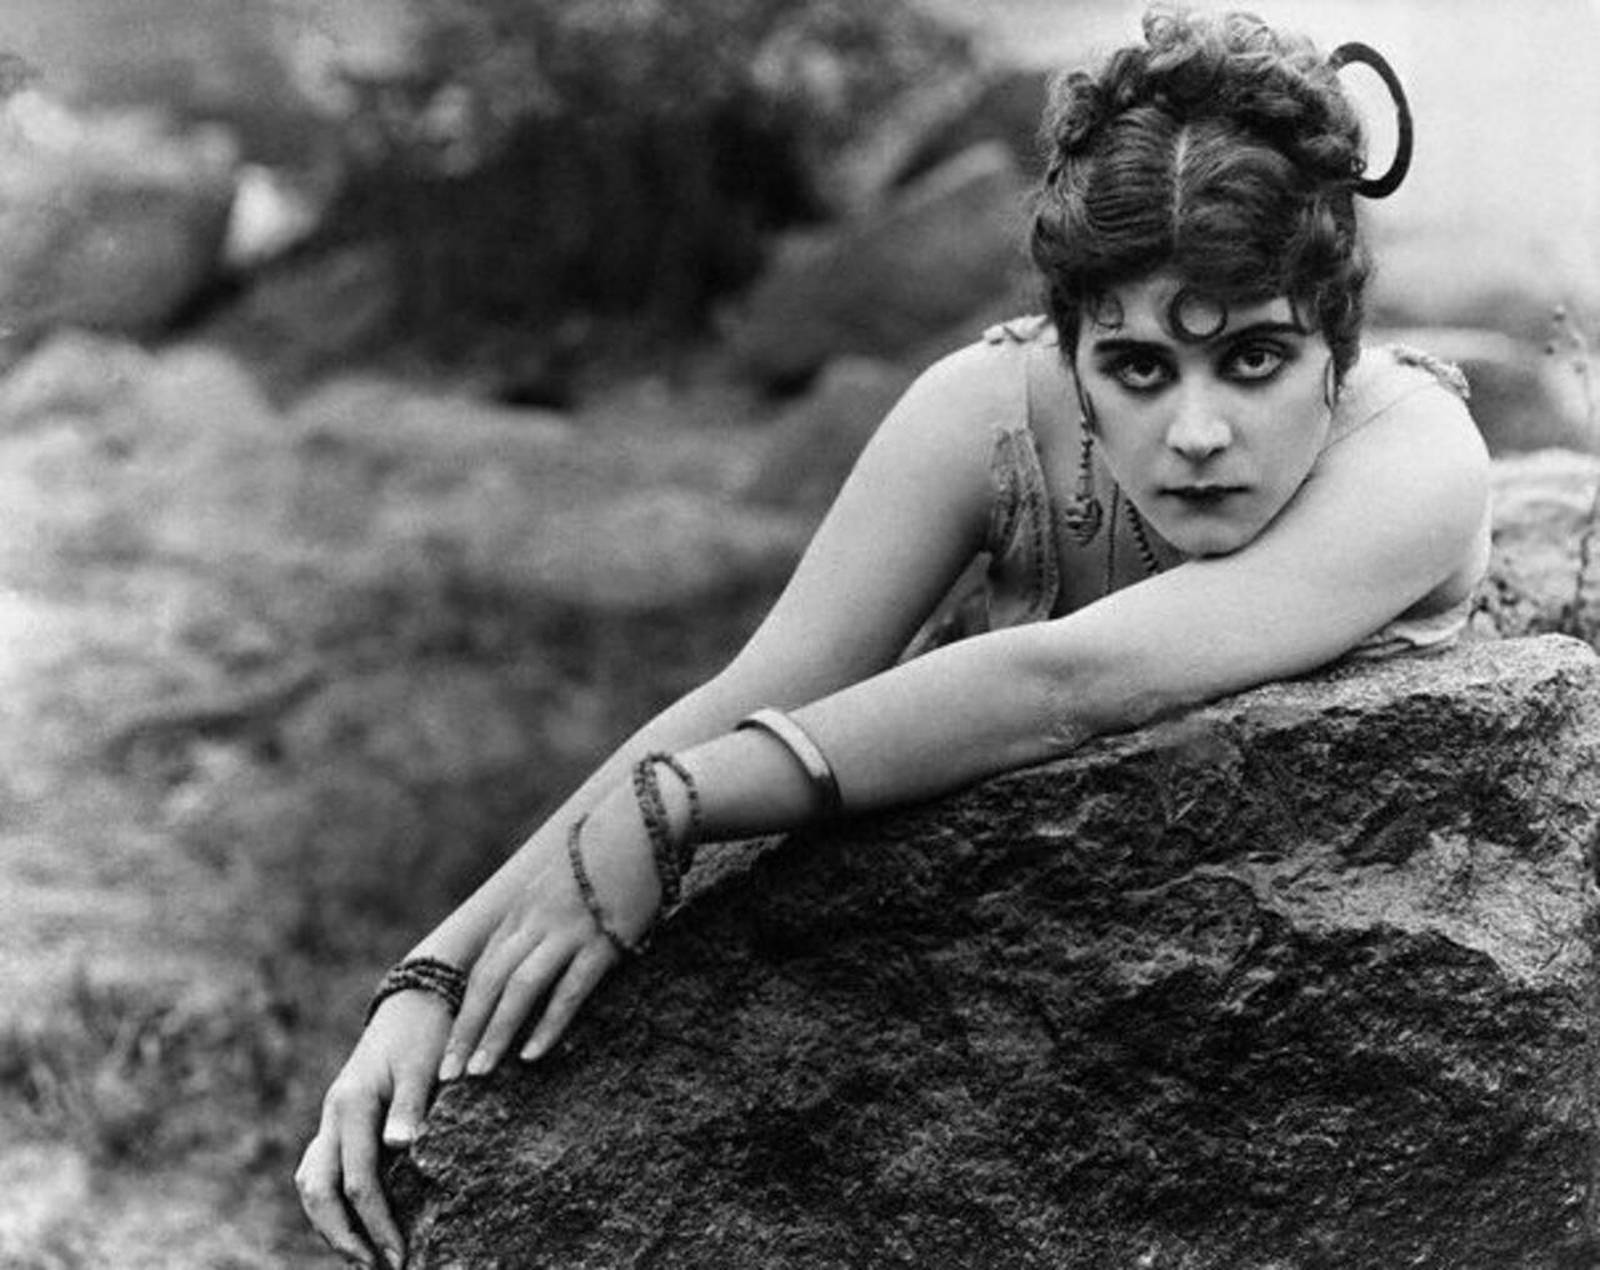 Theda Bara, the first “vamp” of the silver screen, played the title role in the 1919 film Kathleen Mavourneen